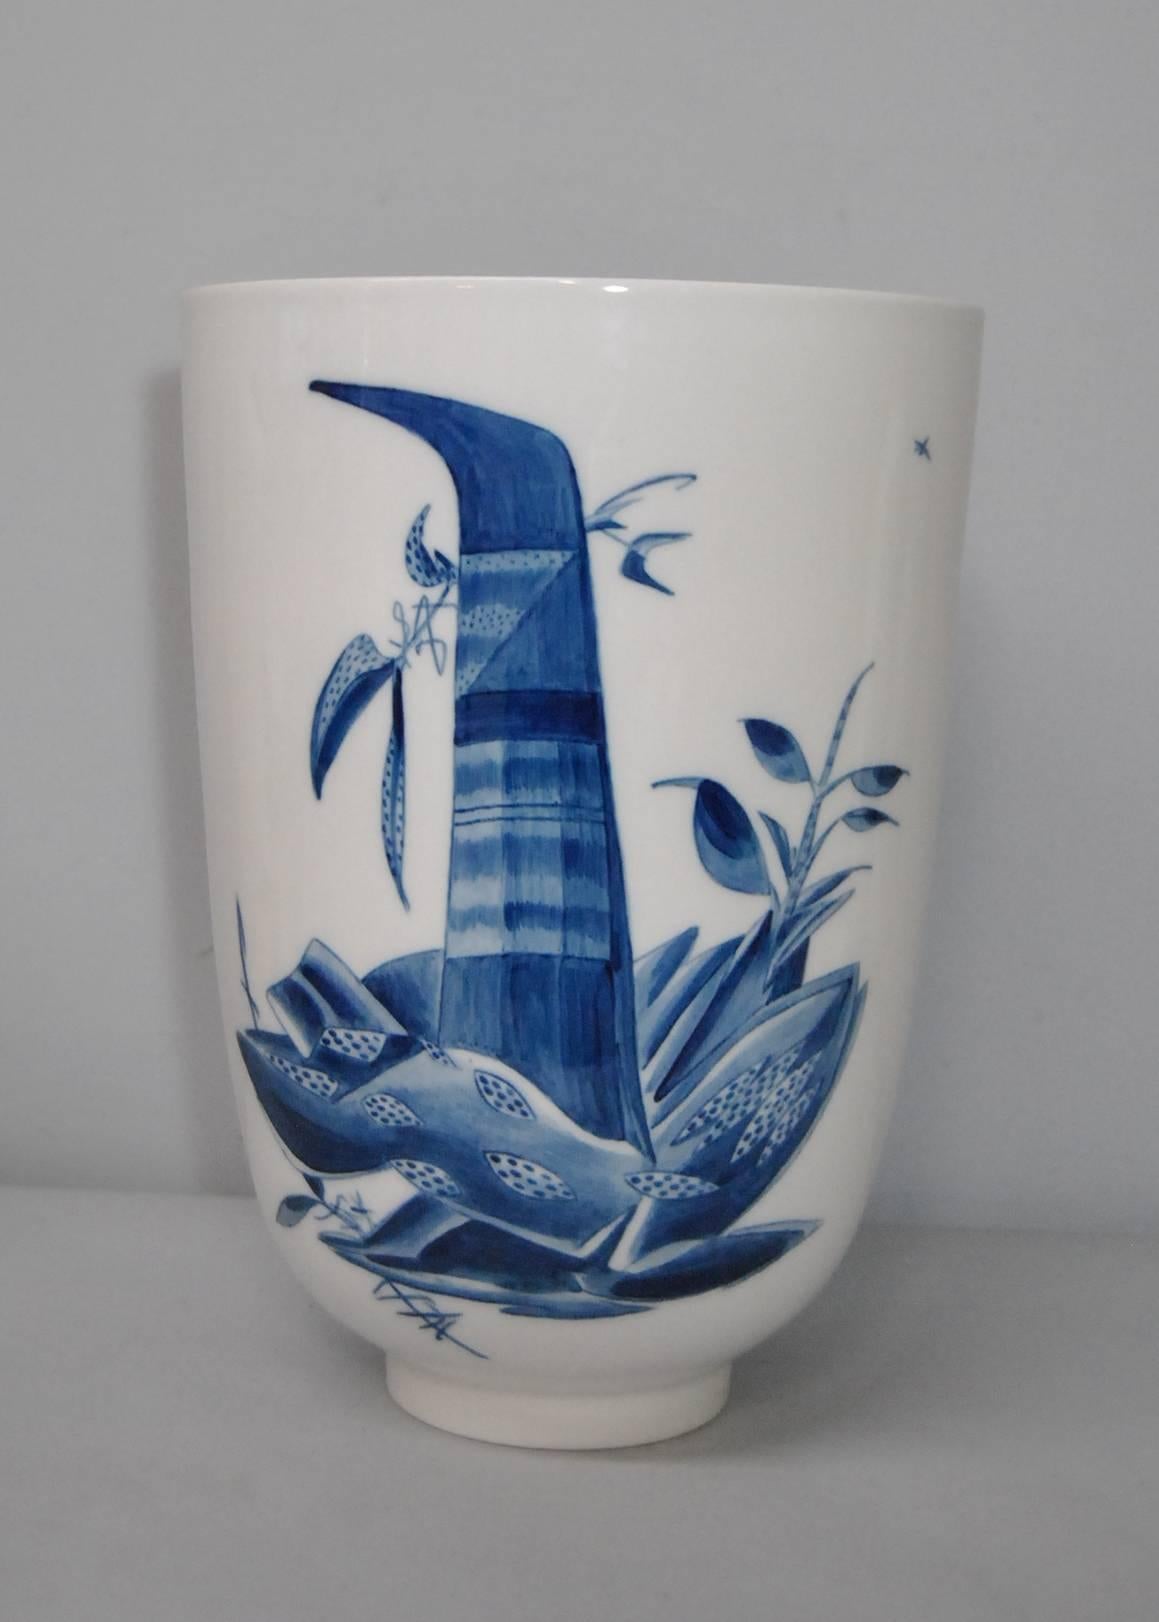 This is a large floor vase designed by Thorkild Olsen c1890-1973 for Royal Copenhagen.  This has an abstract plant pattern in blue on a white background.  This is a large vase being 18" tall by 13" in diameter at top narrowing to 6"